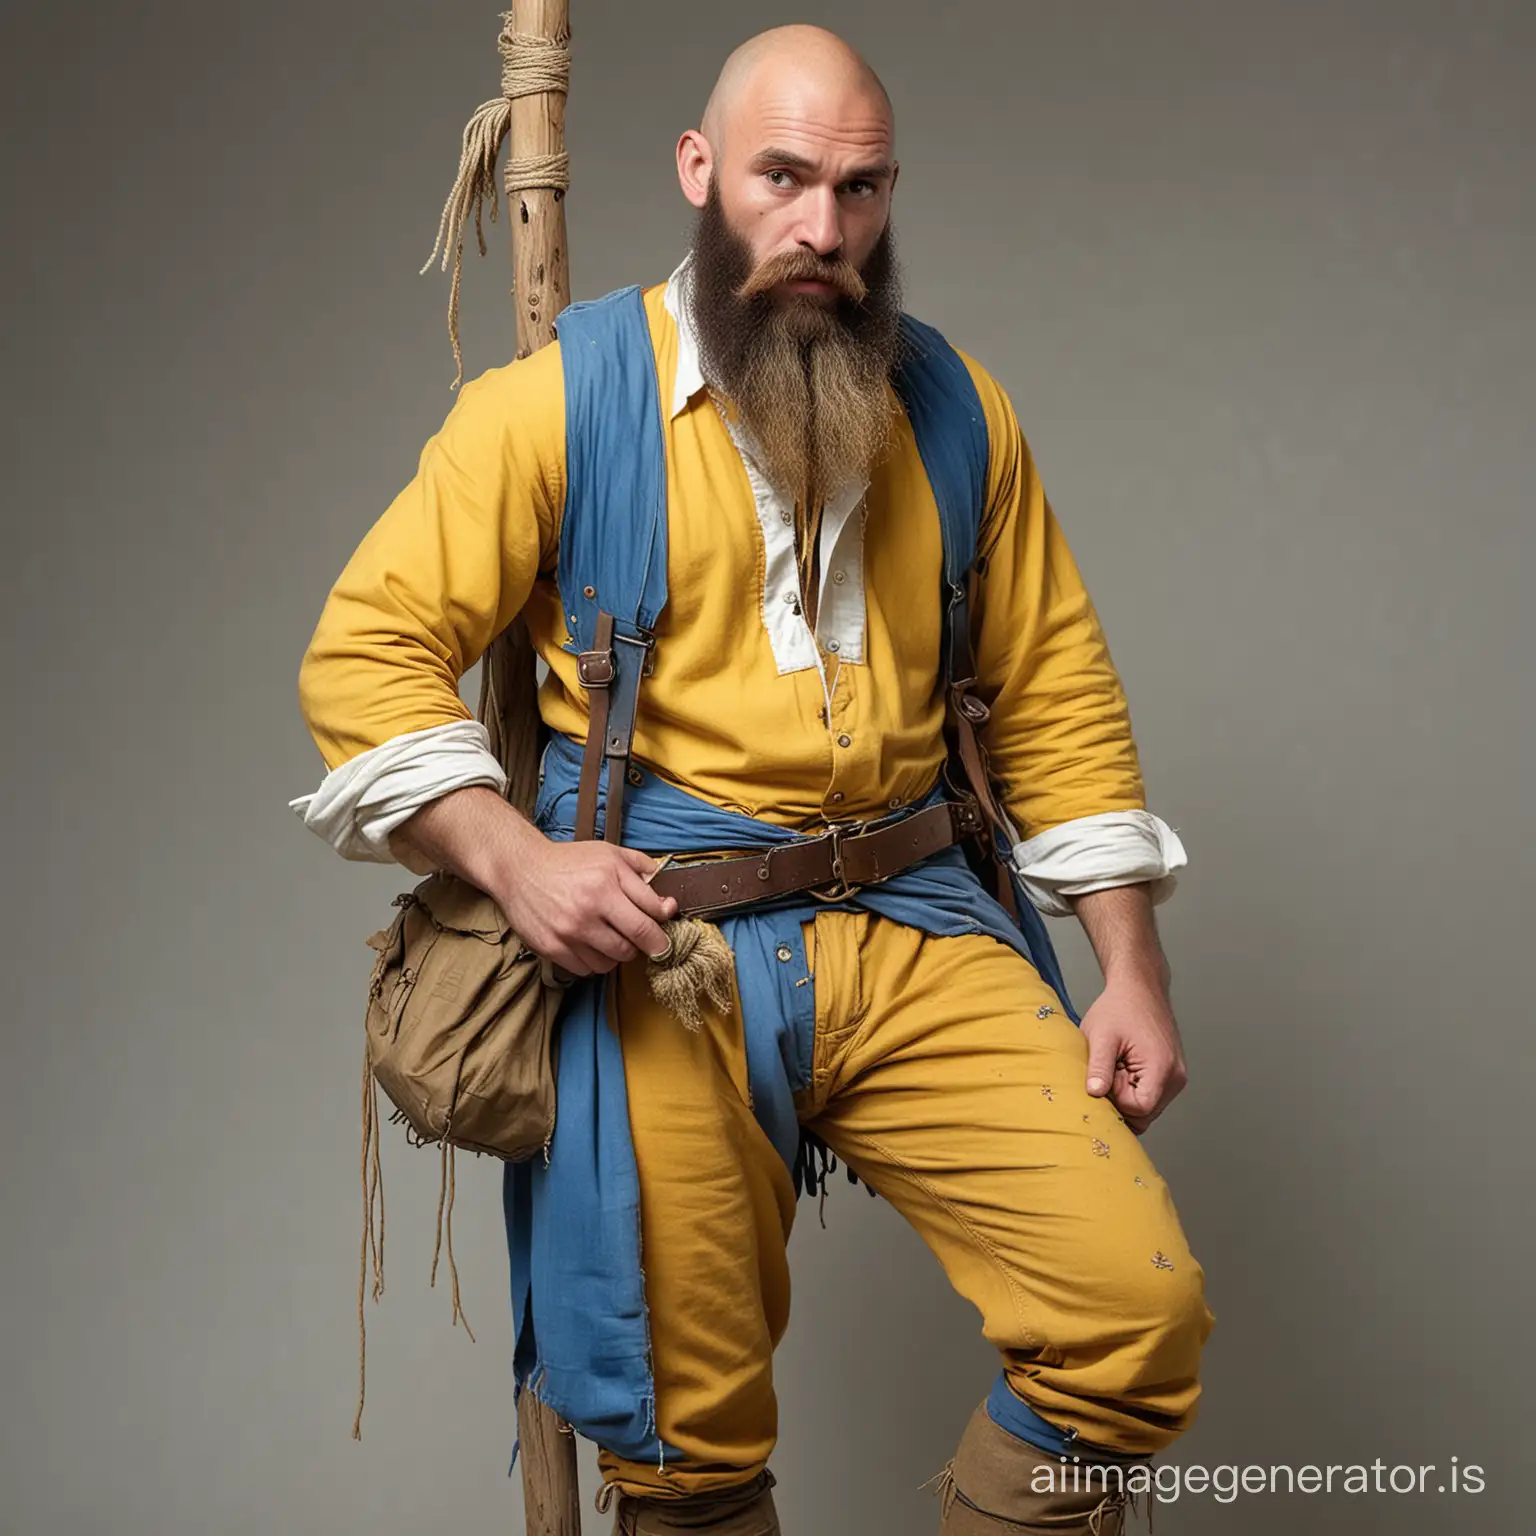 MidHeight-Stocky-Man-in-19th-Century-Digne-Sweaty-Cap-Coarse-Canvas-Shirt-Tattered-Blue-Pants-Soldiers-Bag-Knotty-Stick